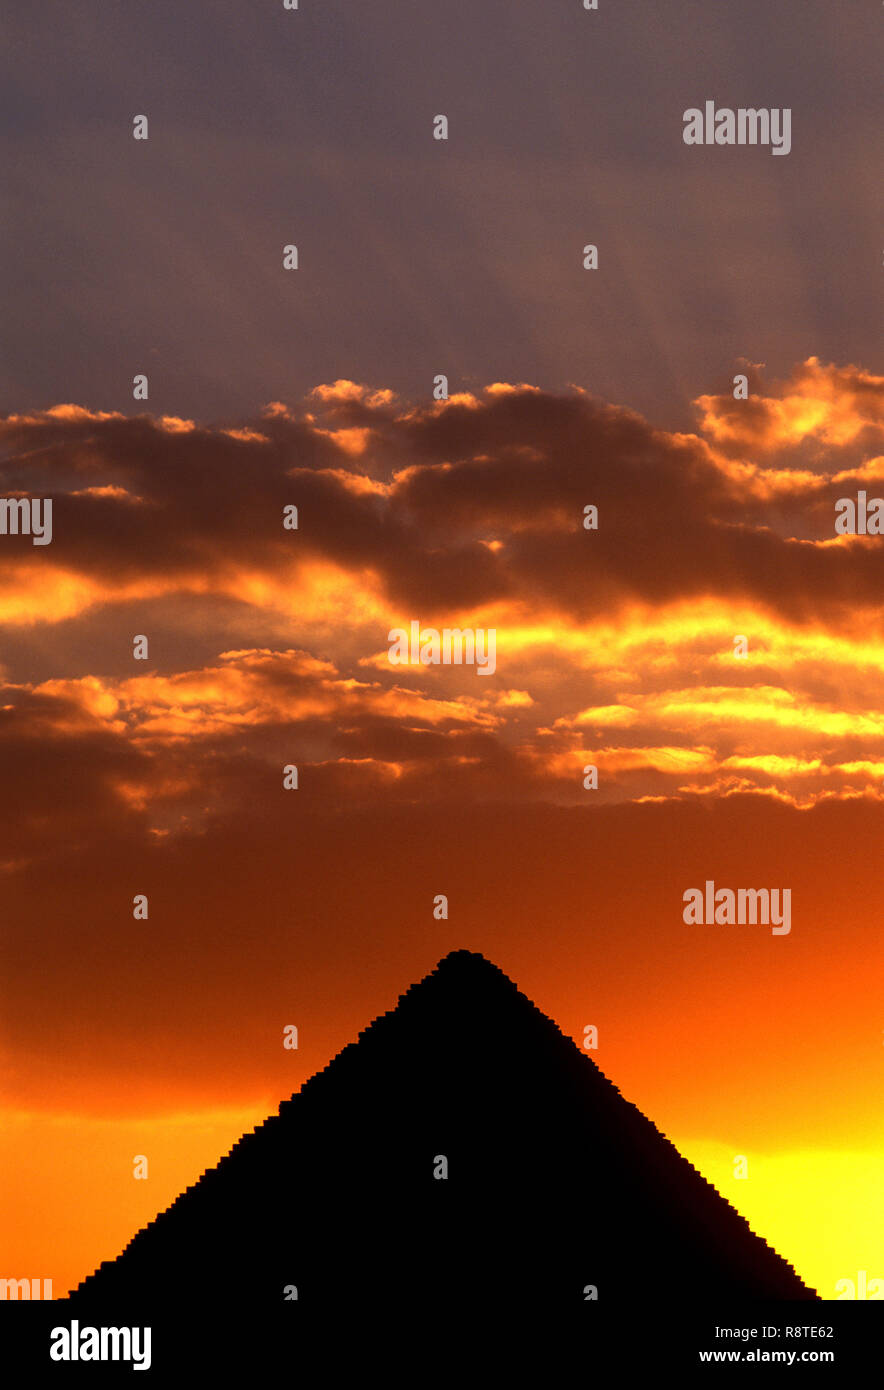 Cairo, Egypt. 13th Apr, 2006. The Great Pyramid of Giza seen in Cairo at sunset.The city of Cairo is the capital of Egypt, it is located in northern part of the country, it has a population 9.7 million in 2018. Credit: John Wreford/SOPA Images/ZUMA Wire/Alamy Live News Stock Photo